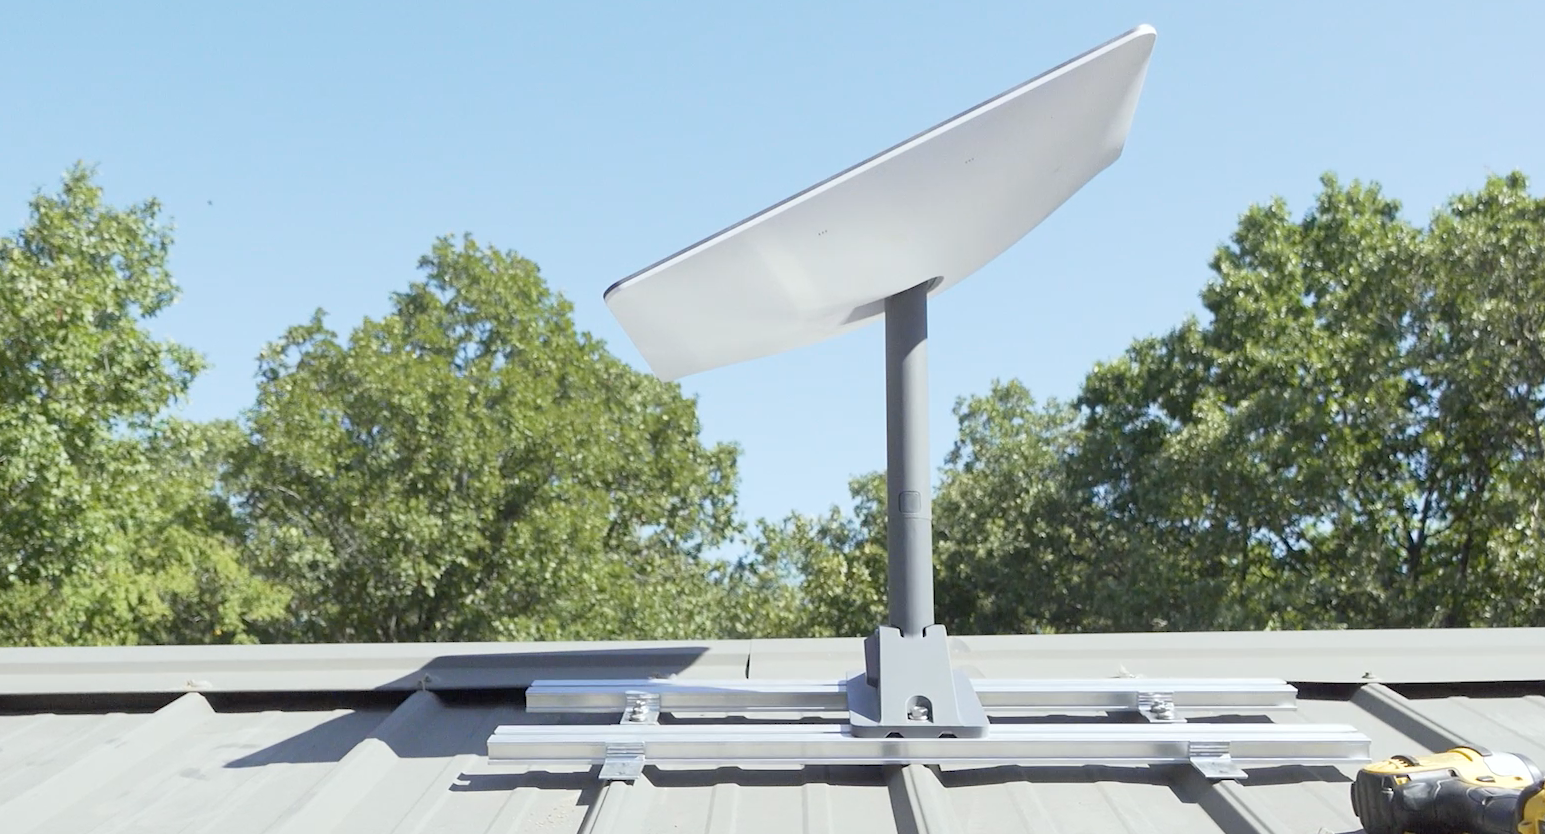 The Best Way to Mount a Starlink Satellite Dish to Your Metal Roof